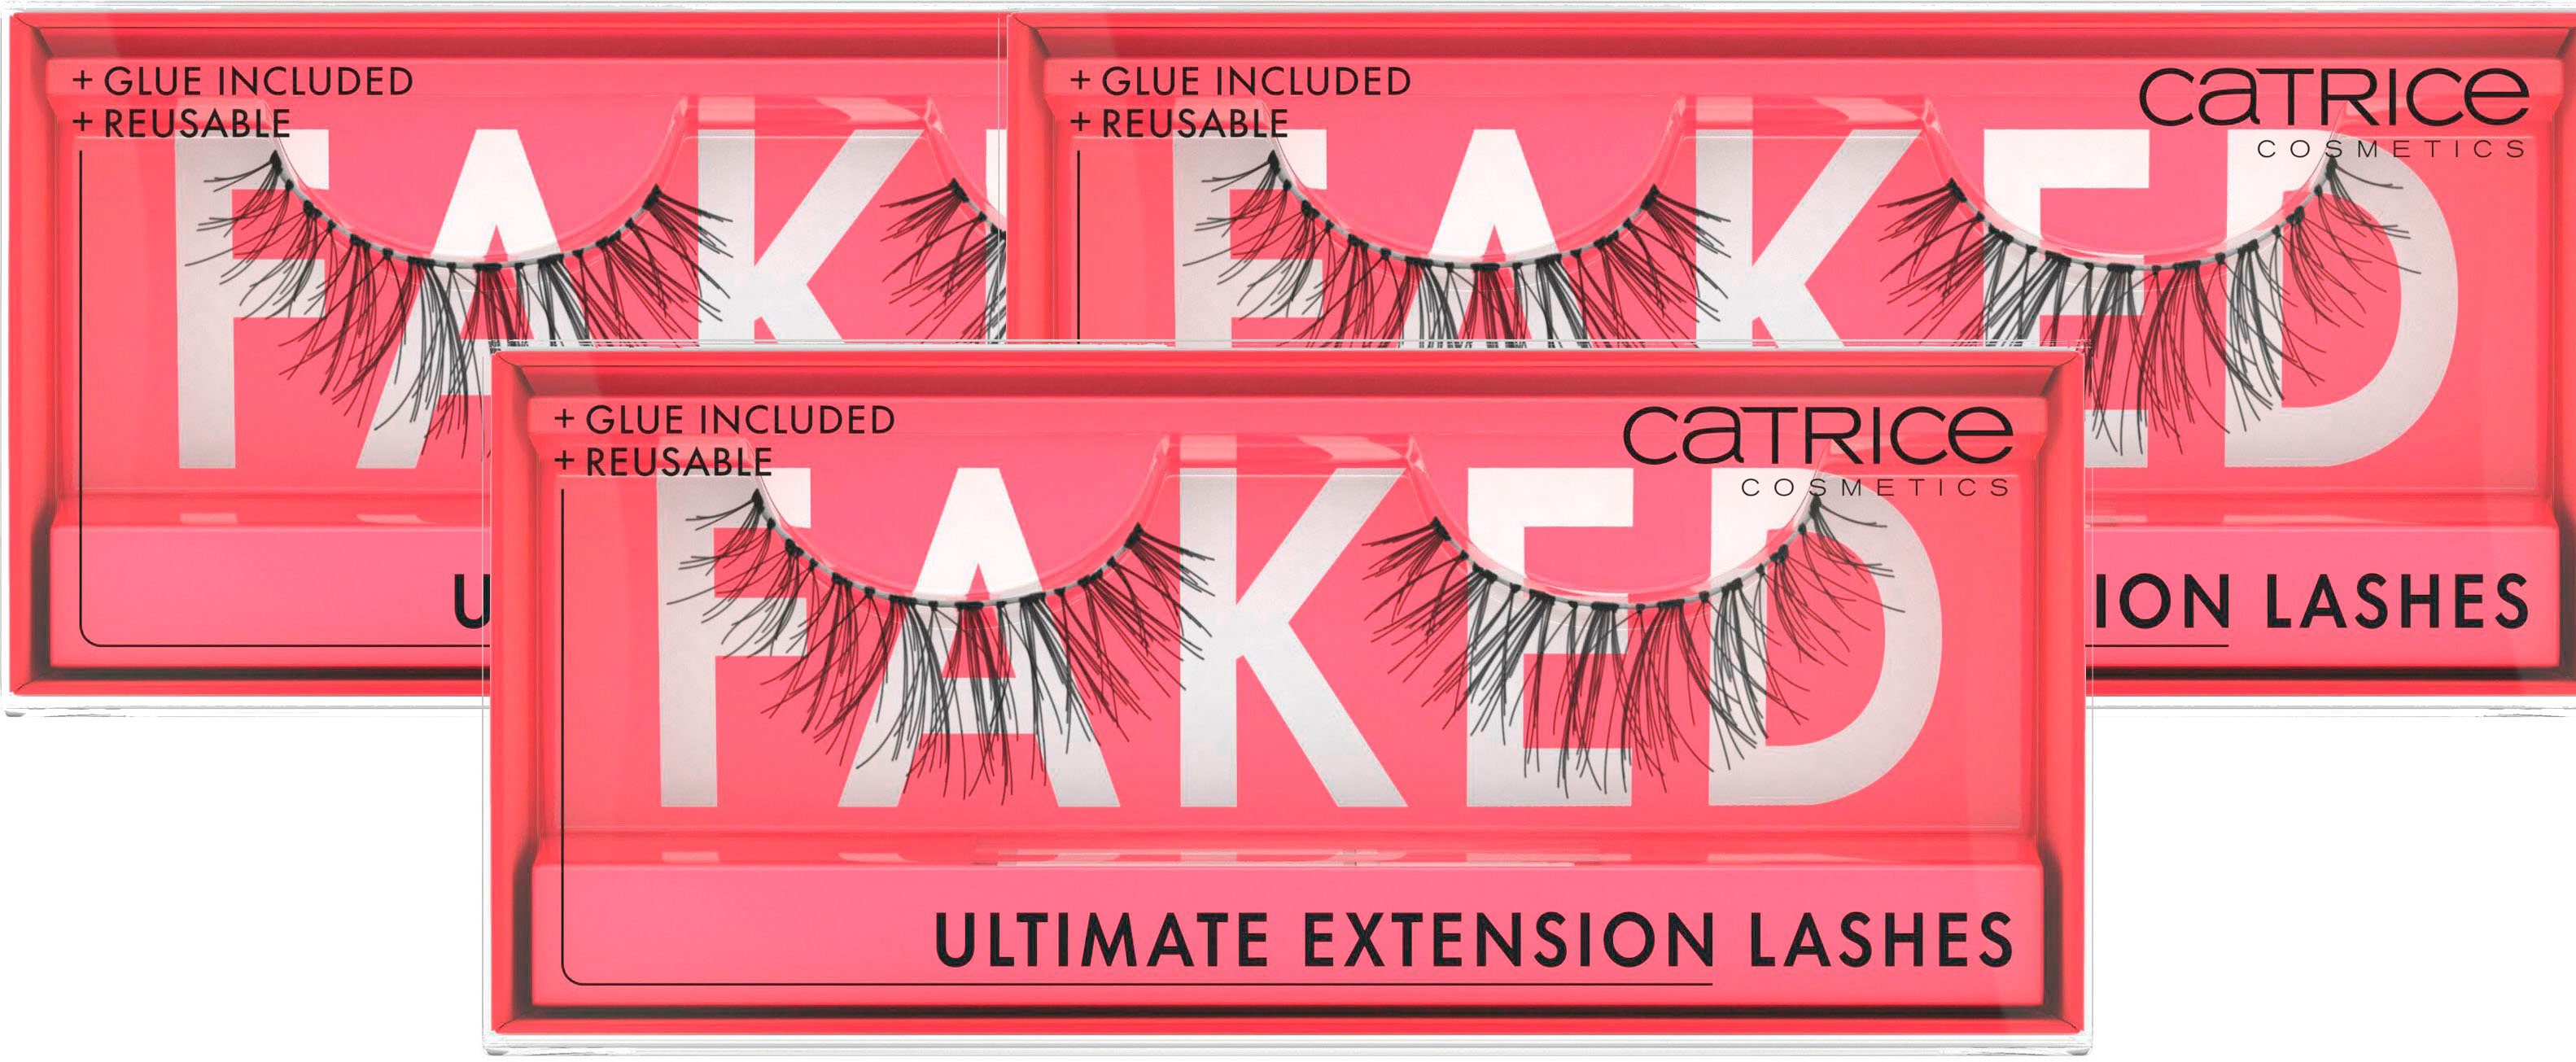 Extension Faked 3 Catrice Lashes, Bandwimpern tlg. Ultimate Set,